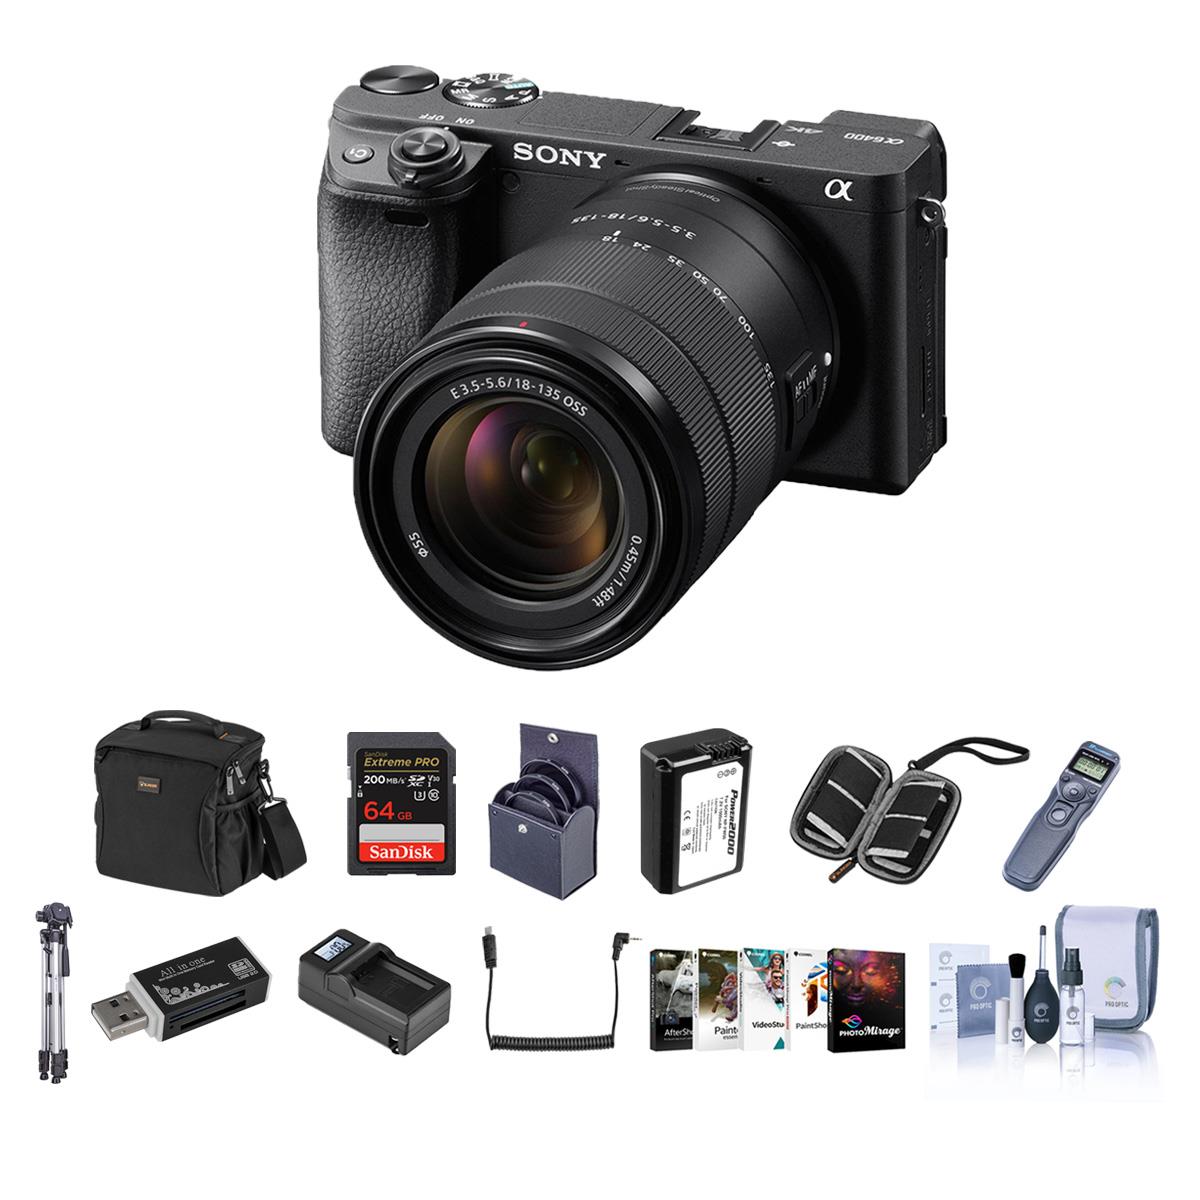 Sony Alpha a6400 Mirrorless Camera with 18-135mmf/3.5-5.6 OS Lens W/Accesory Kit